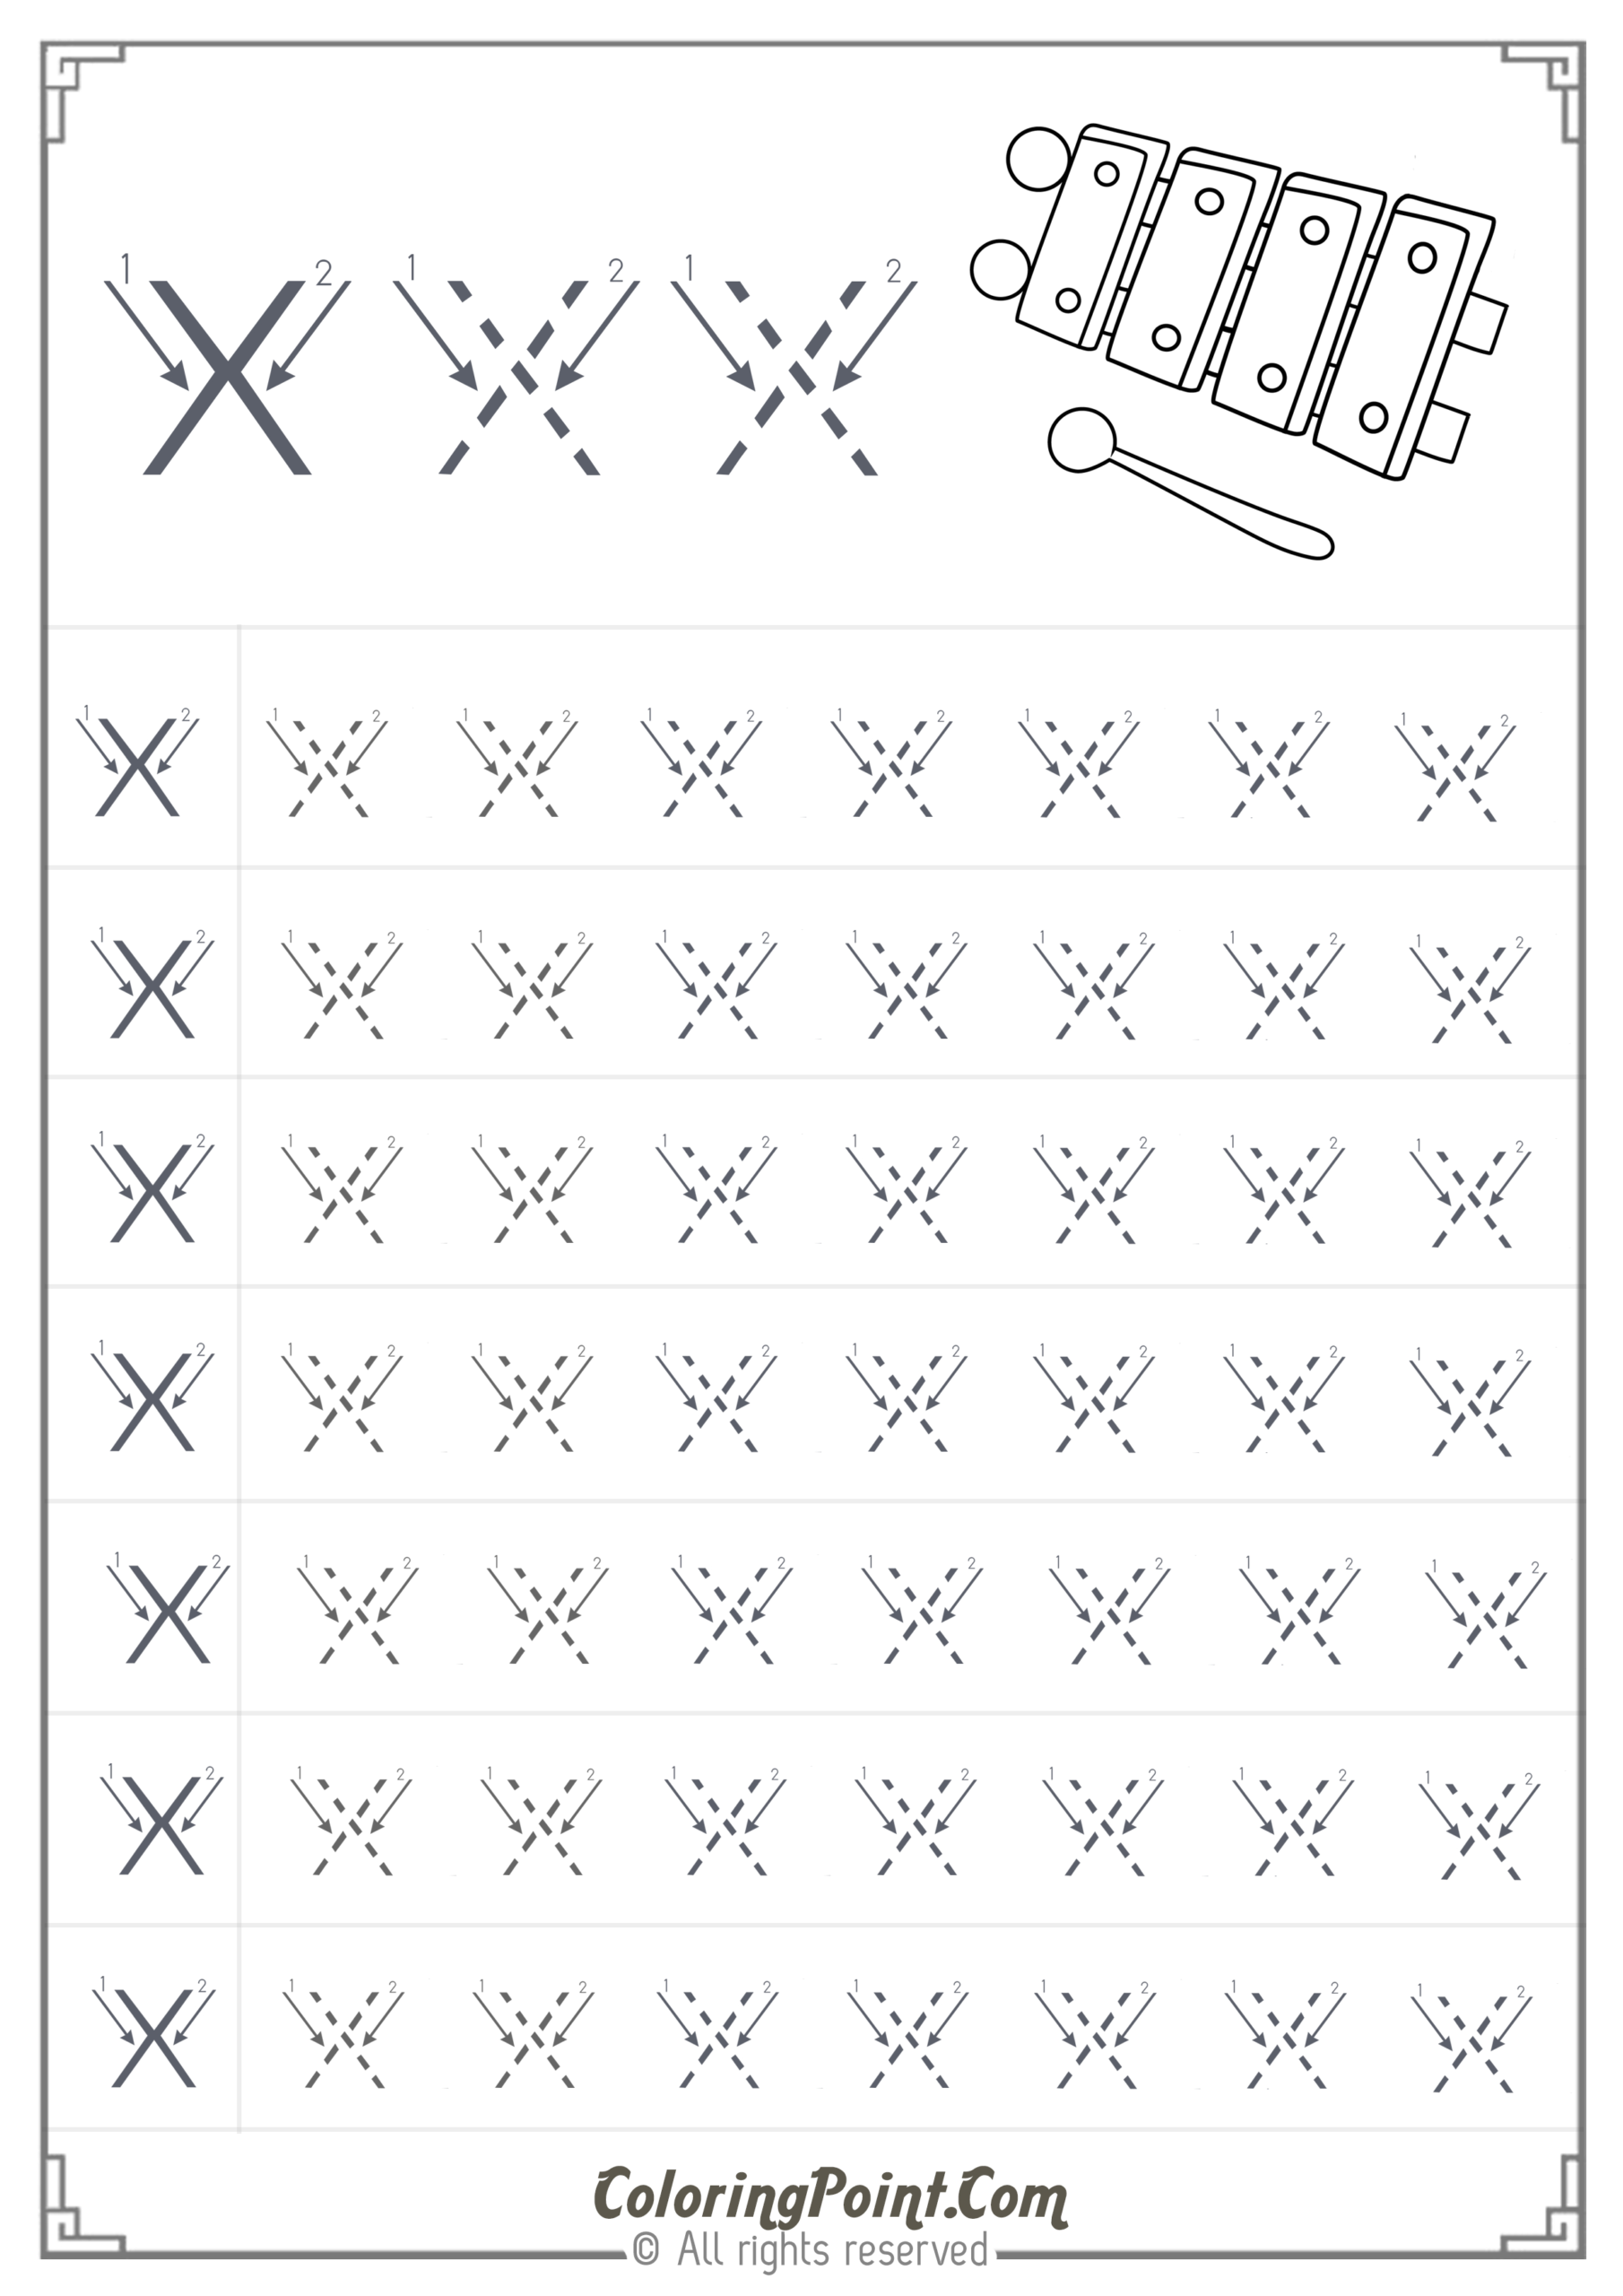 Free Printable Tracing Letter X Worksheets For Preschool throughout Letter X Worksheets Pdf